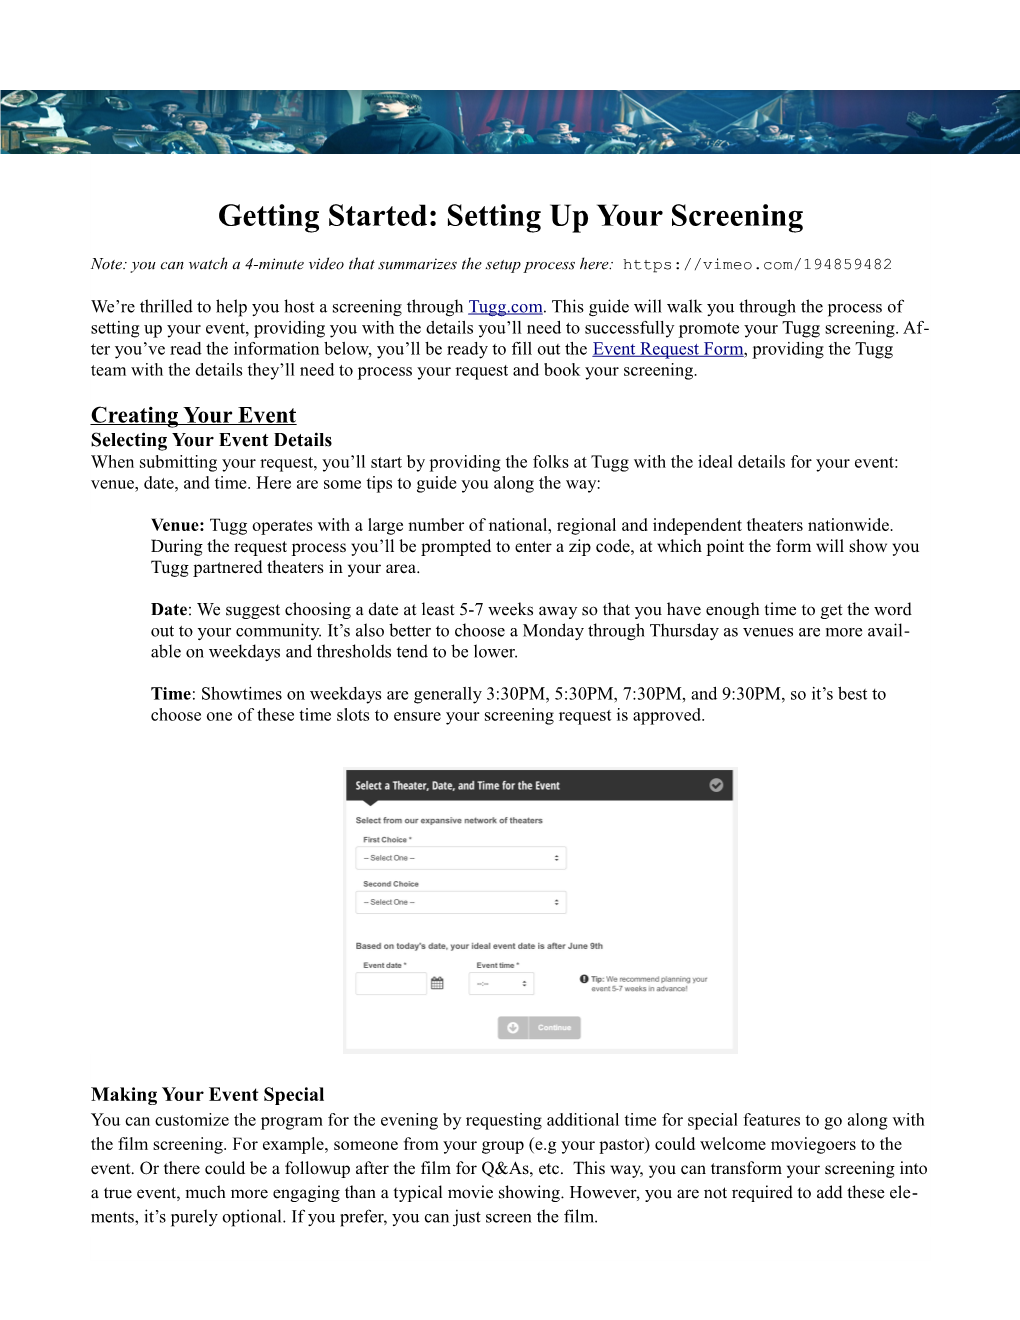 Getting Started: Setting up Your Screening